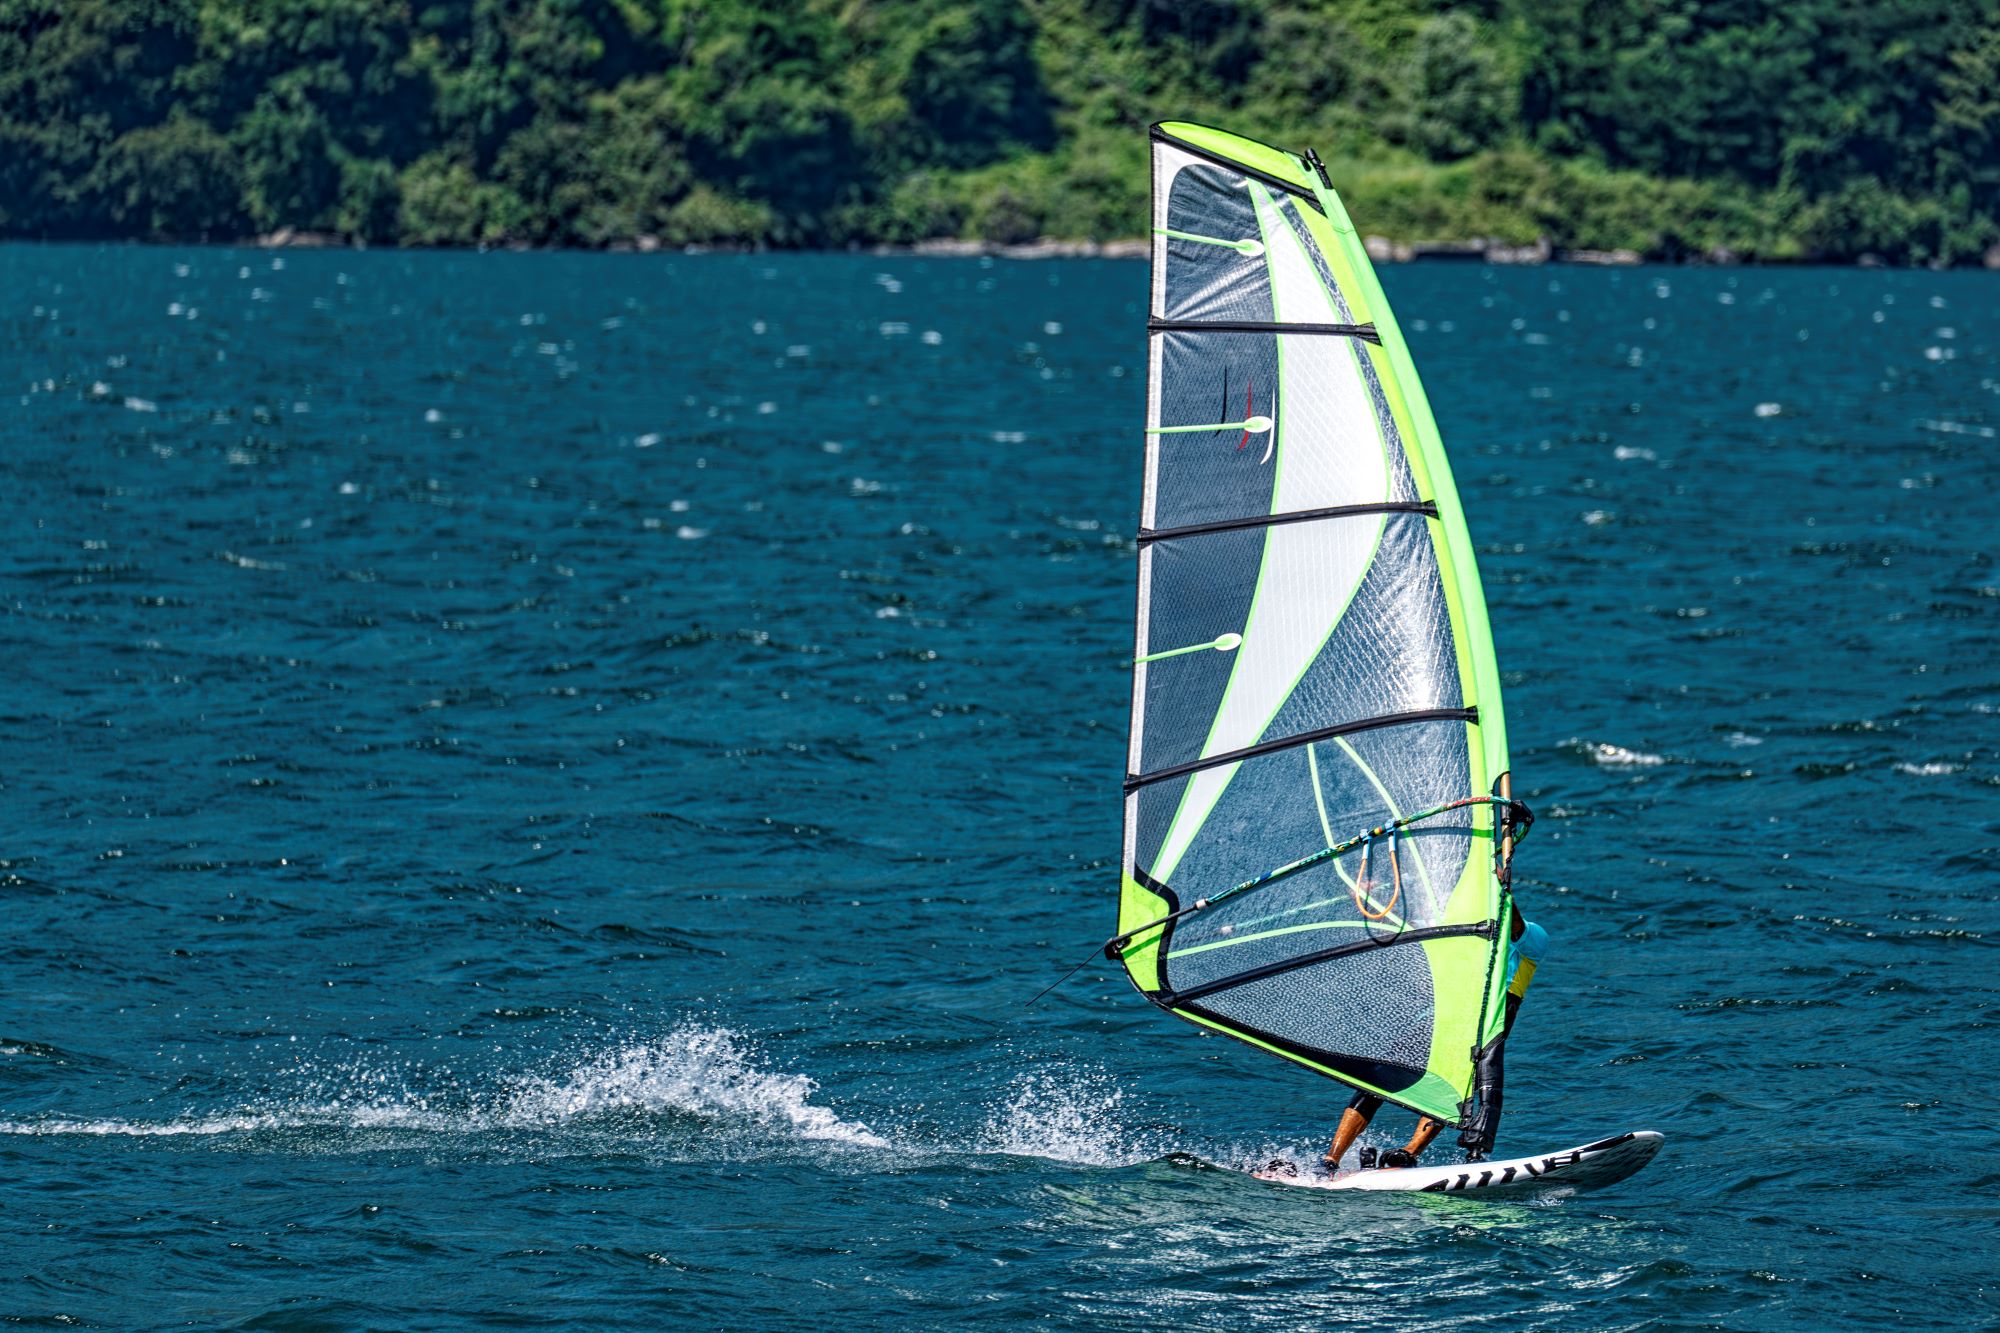 Incredible windsurfing scene on Lake Garda in Torbole, a paradise for water sports enthusiasts